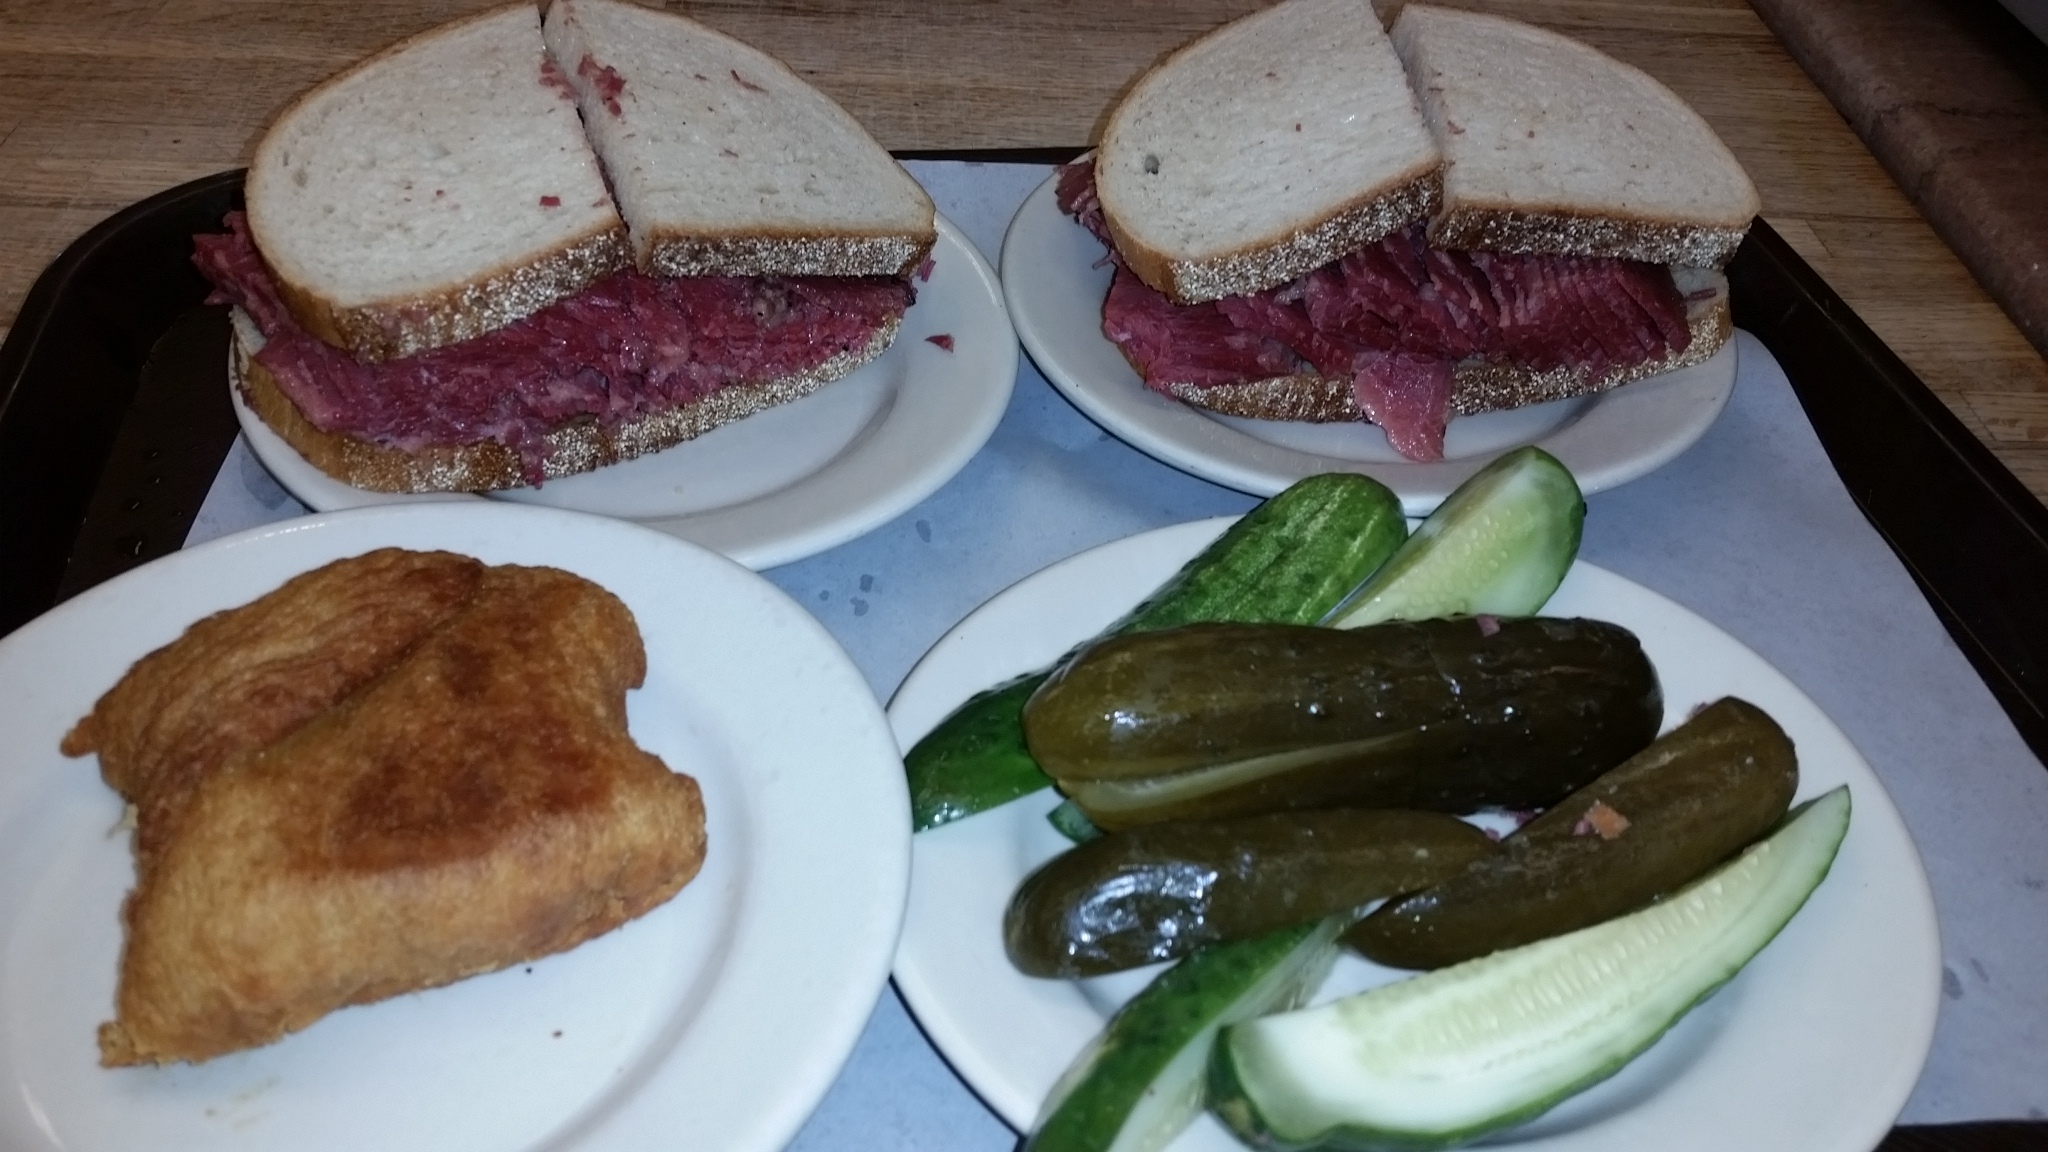 Katz's Deli does the best corned beef sandwiches in New York